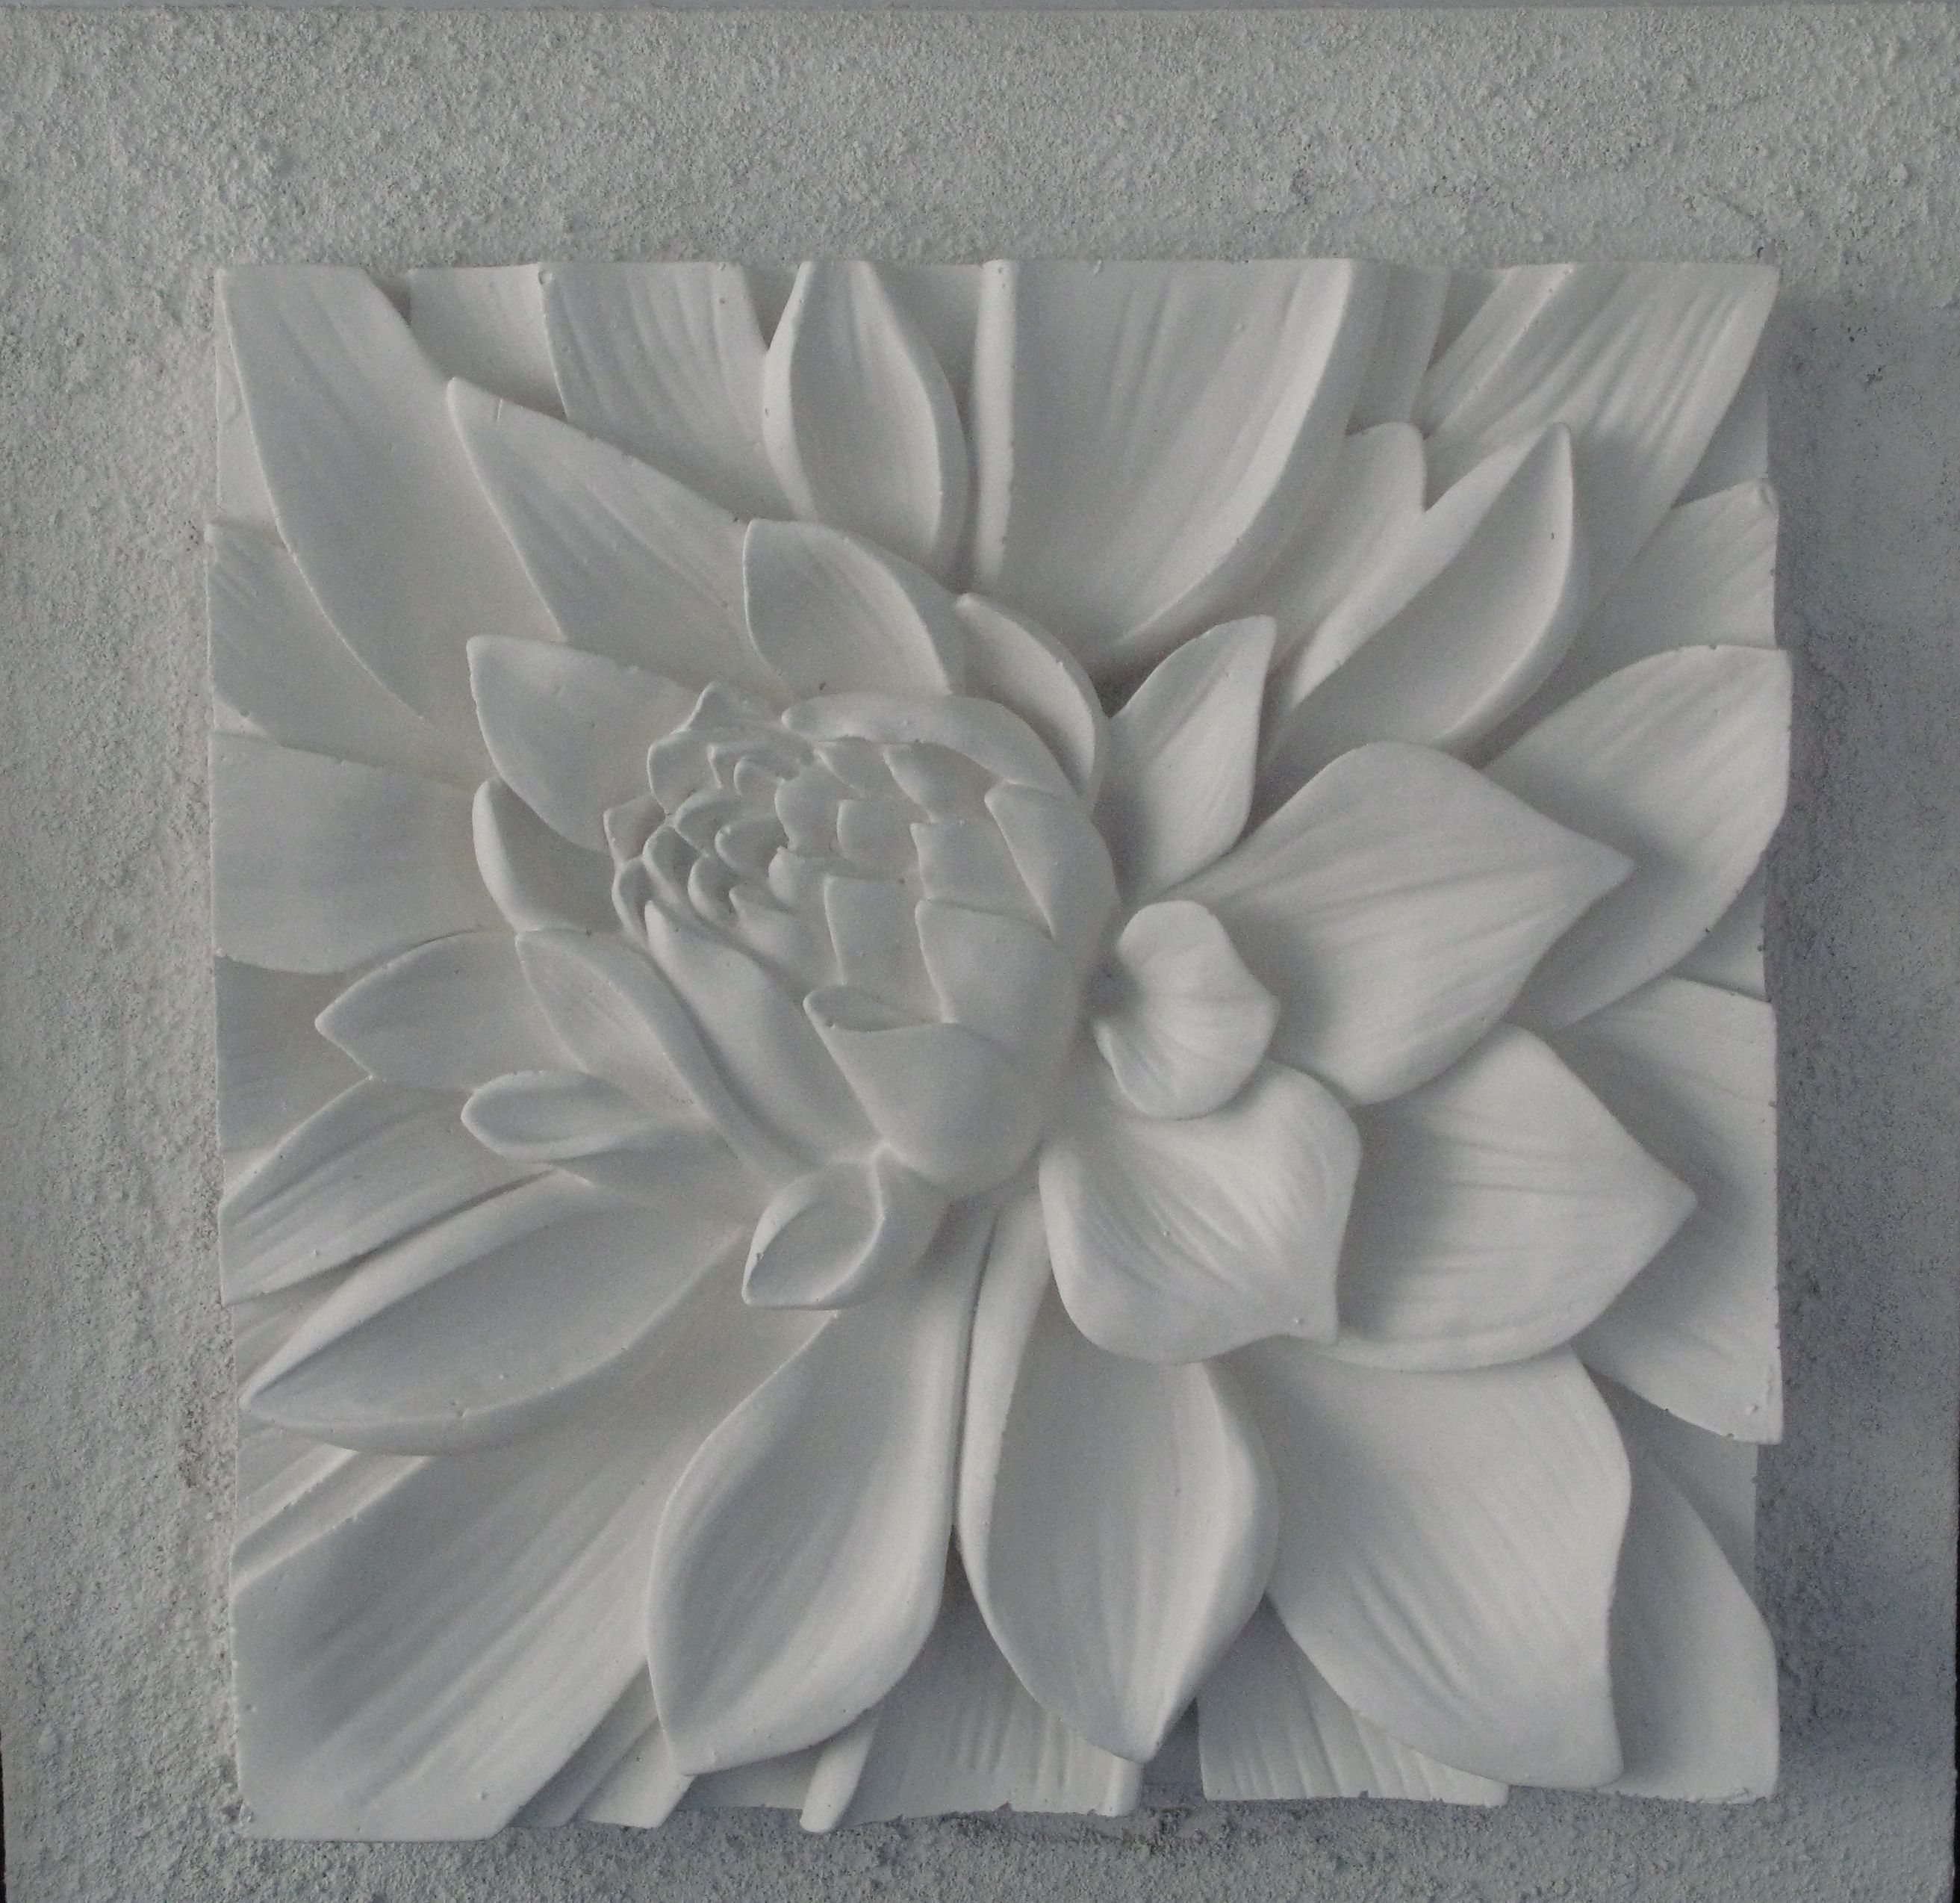 Popular Ceramic Flower Wall Art Throughout Plaster On Canvas 3d Art With Textured Background (View 14 of 15)